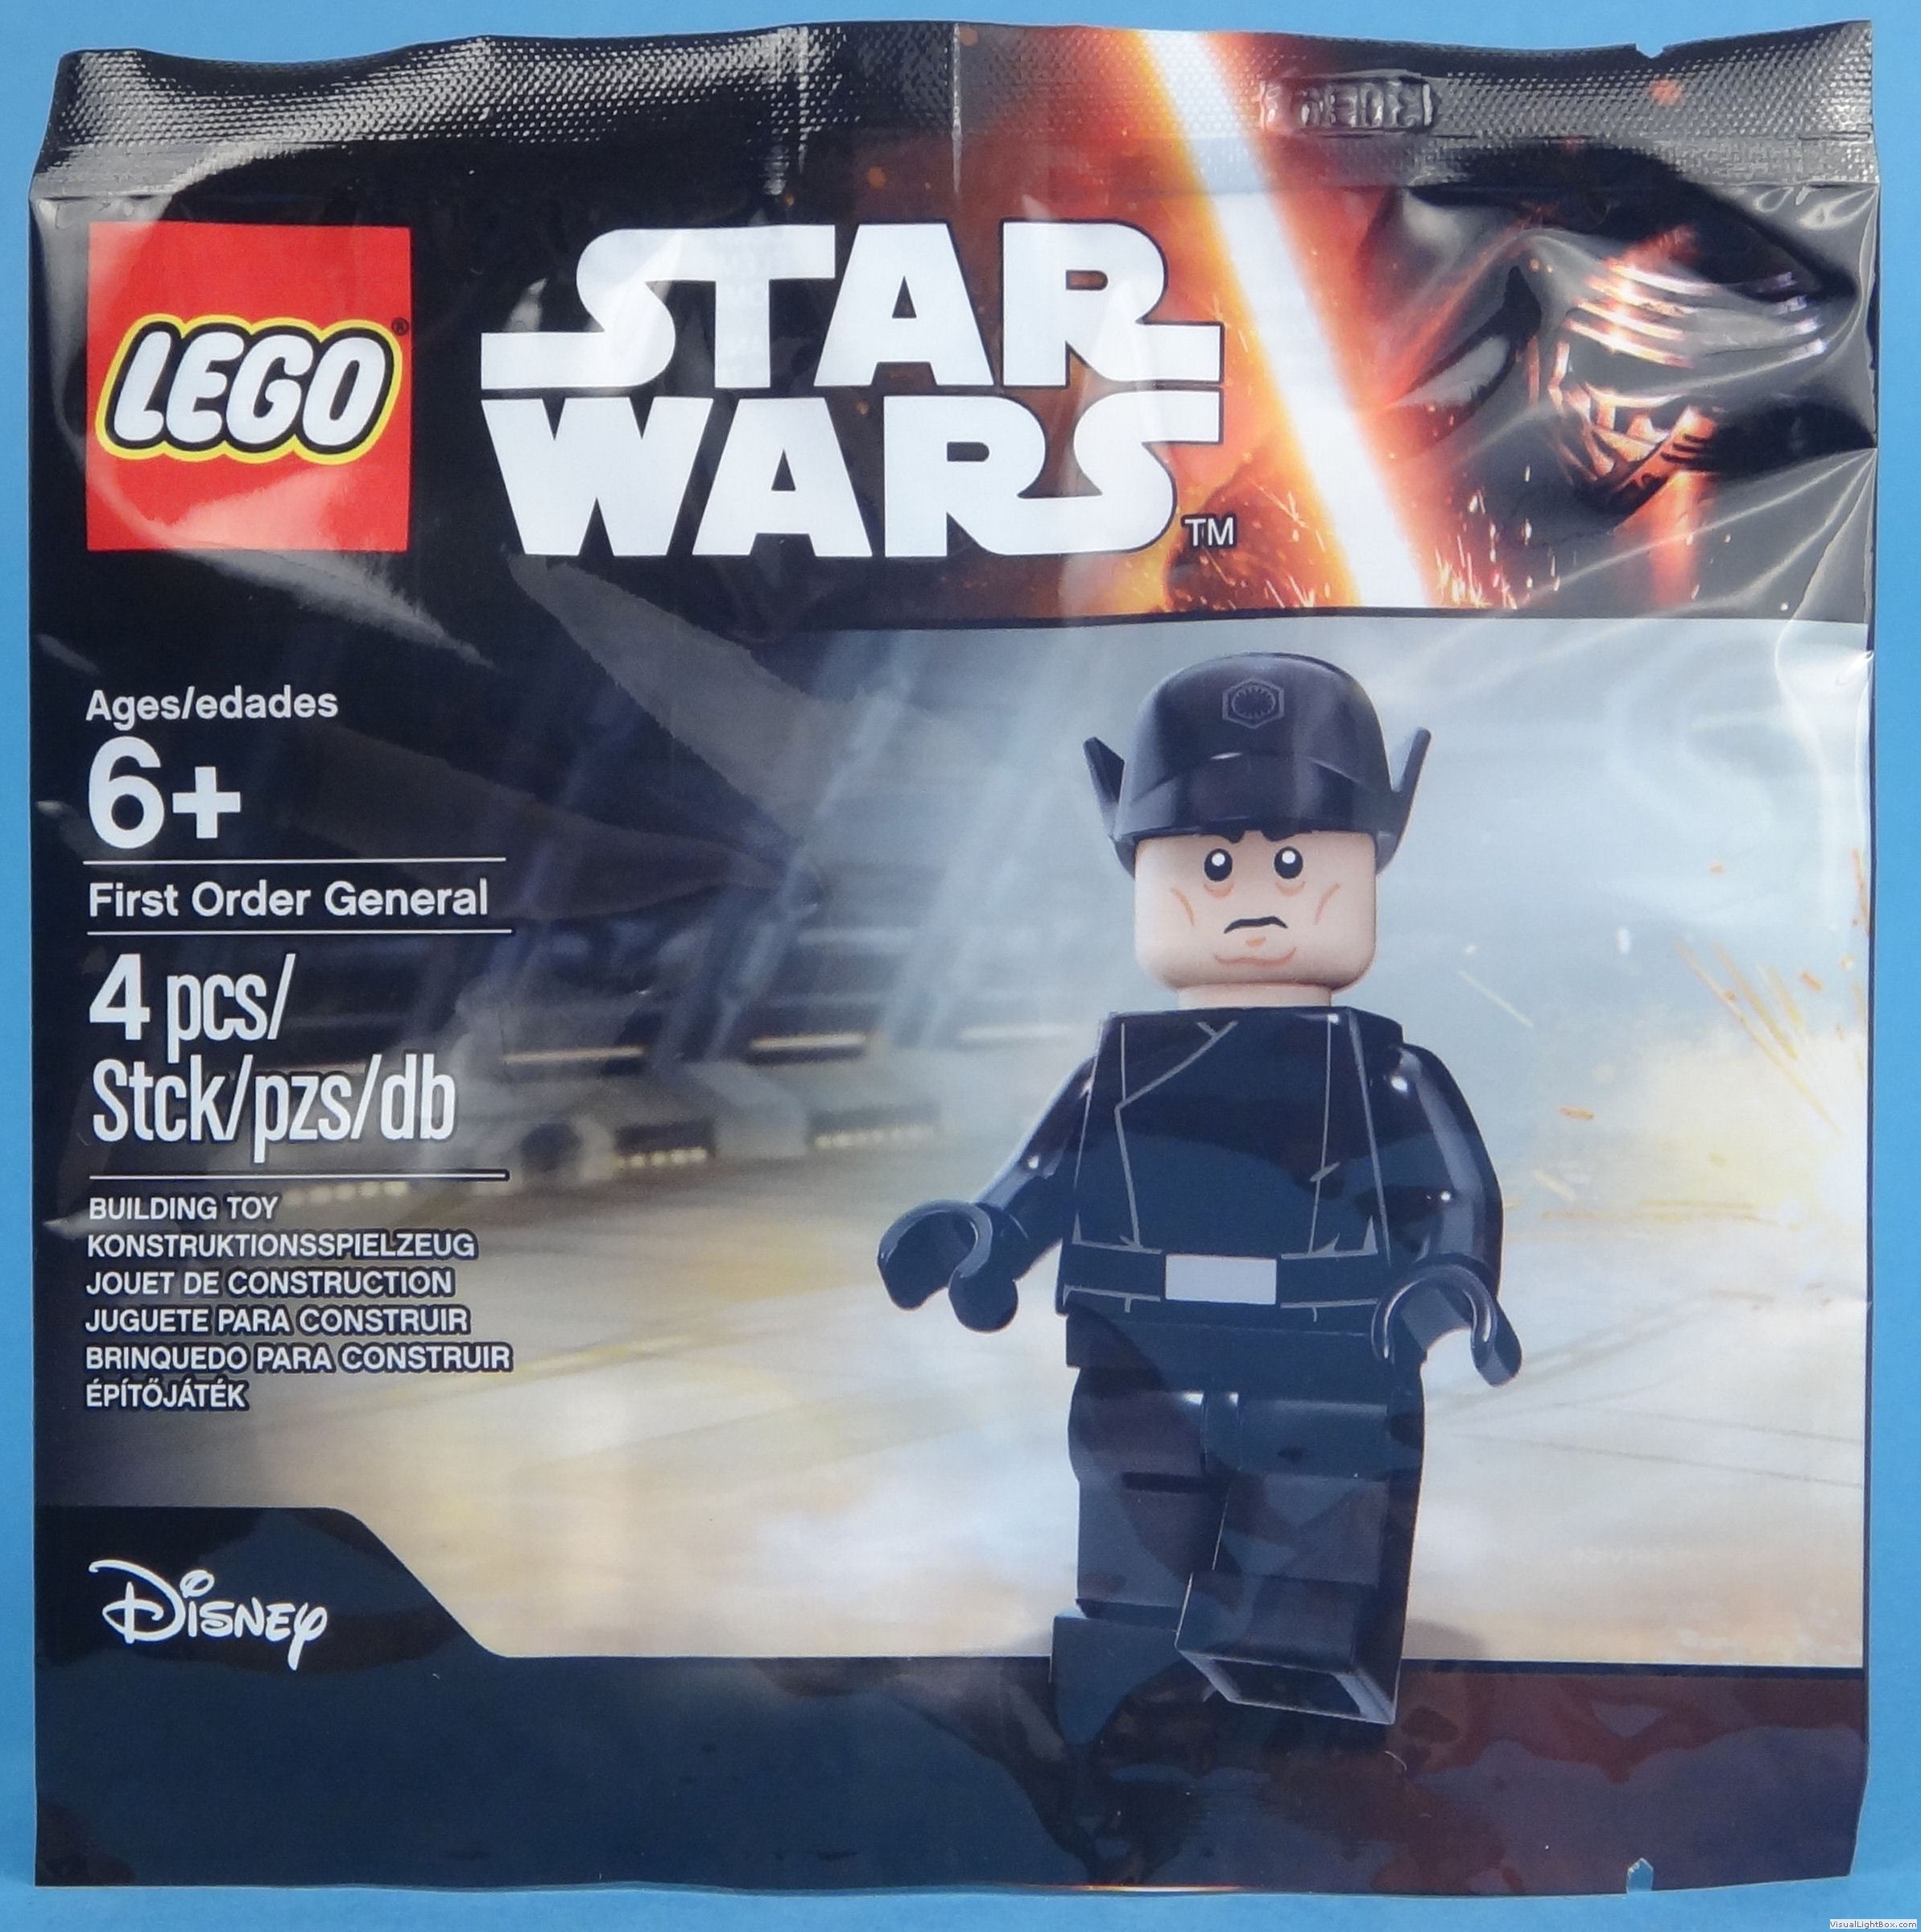 New Sealed Lego Star Wars Polybag First Order General Minifigure 5004406